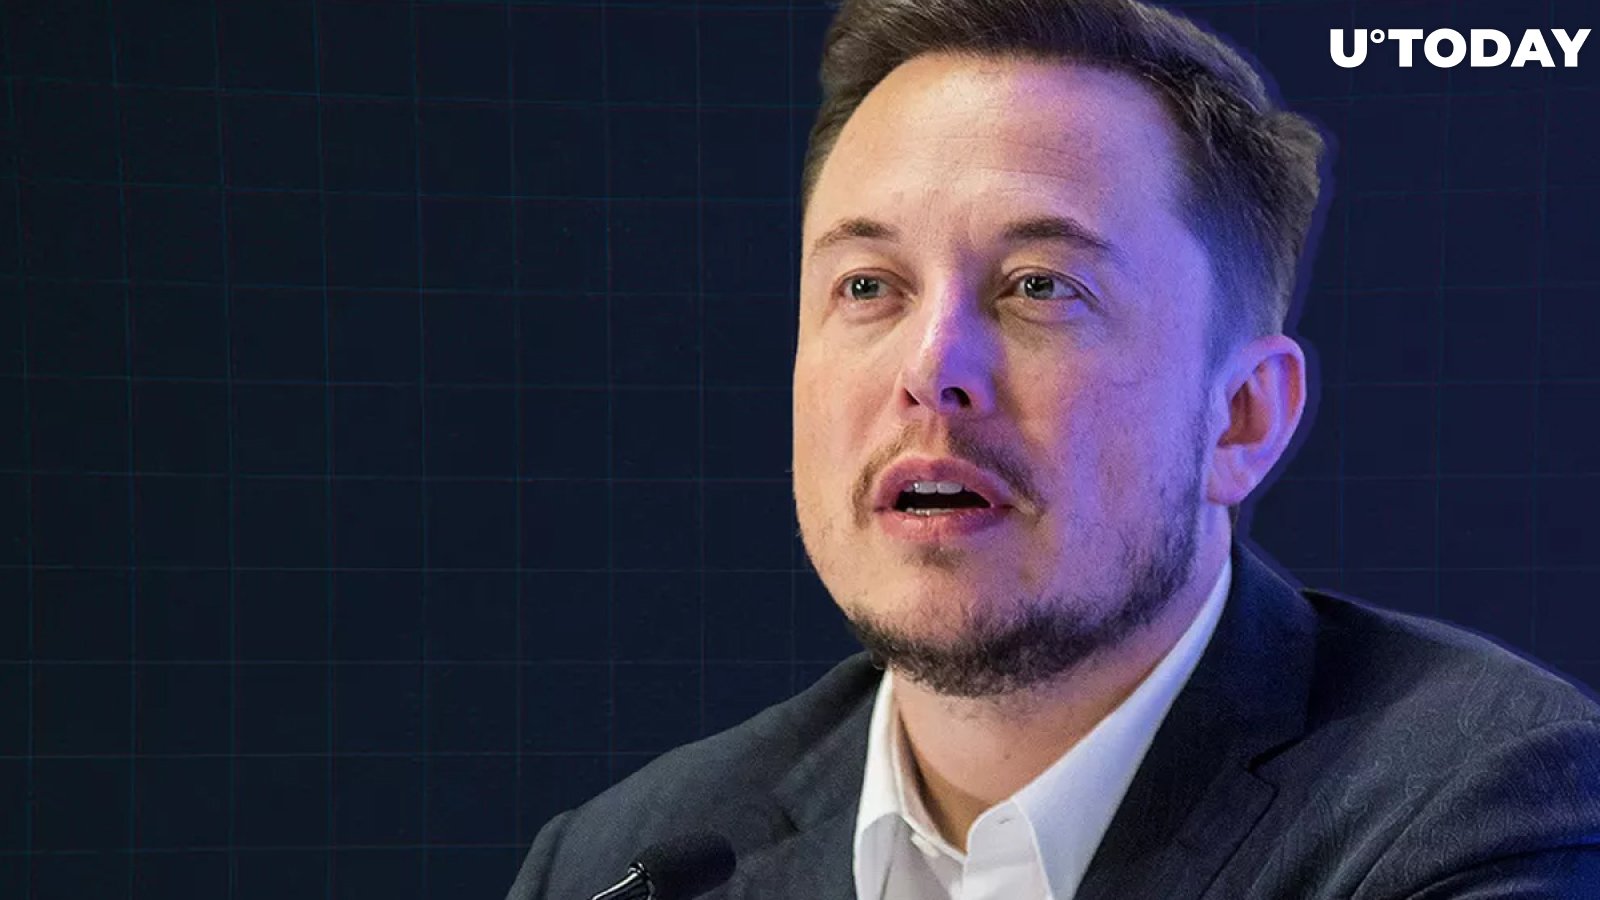 Elon Musk Changes His Twitter Profile Pic to Bitcoin